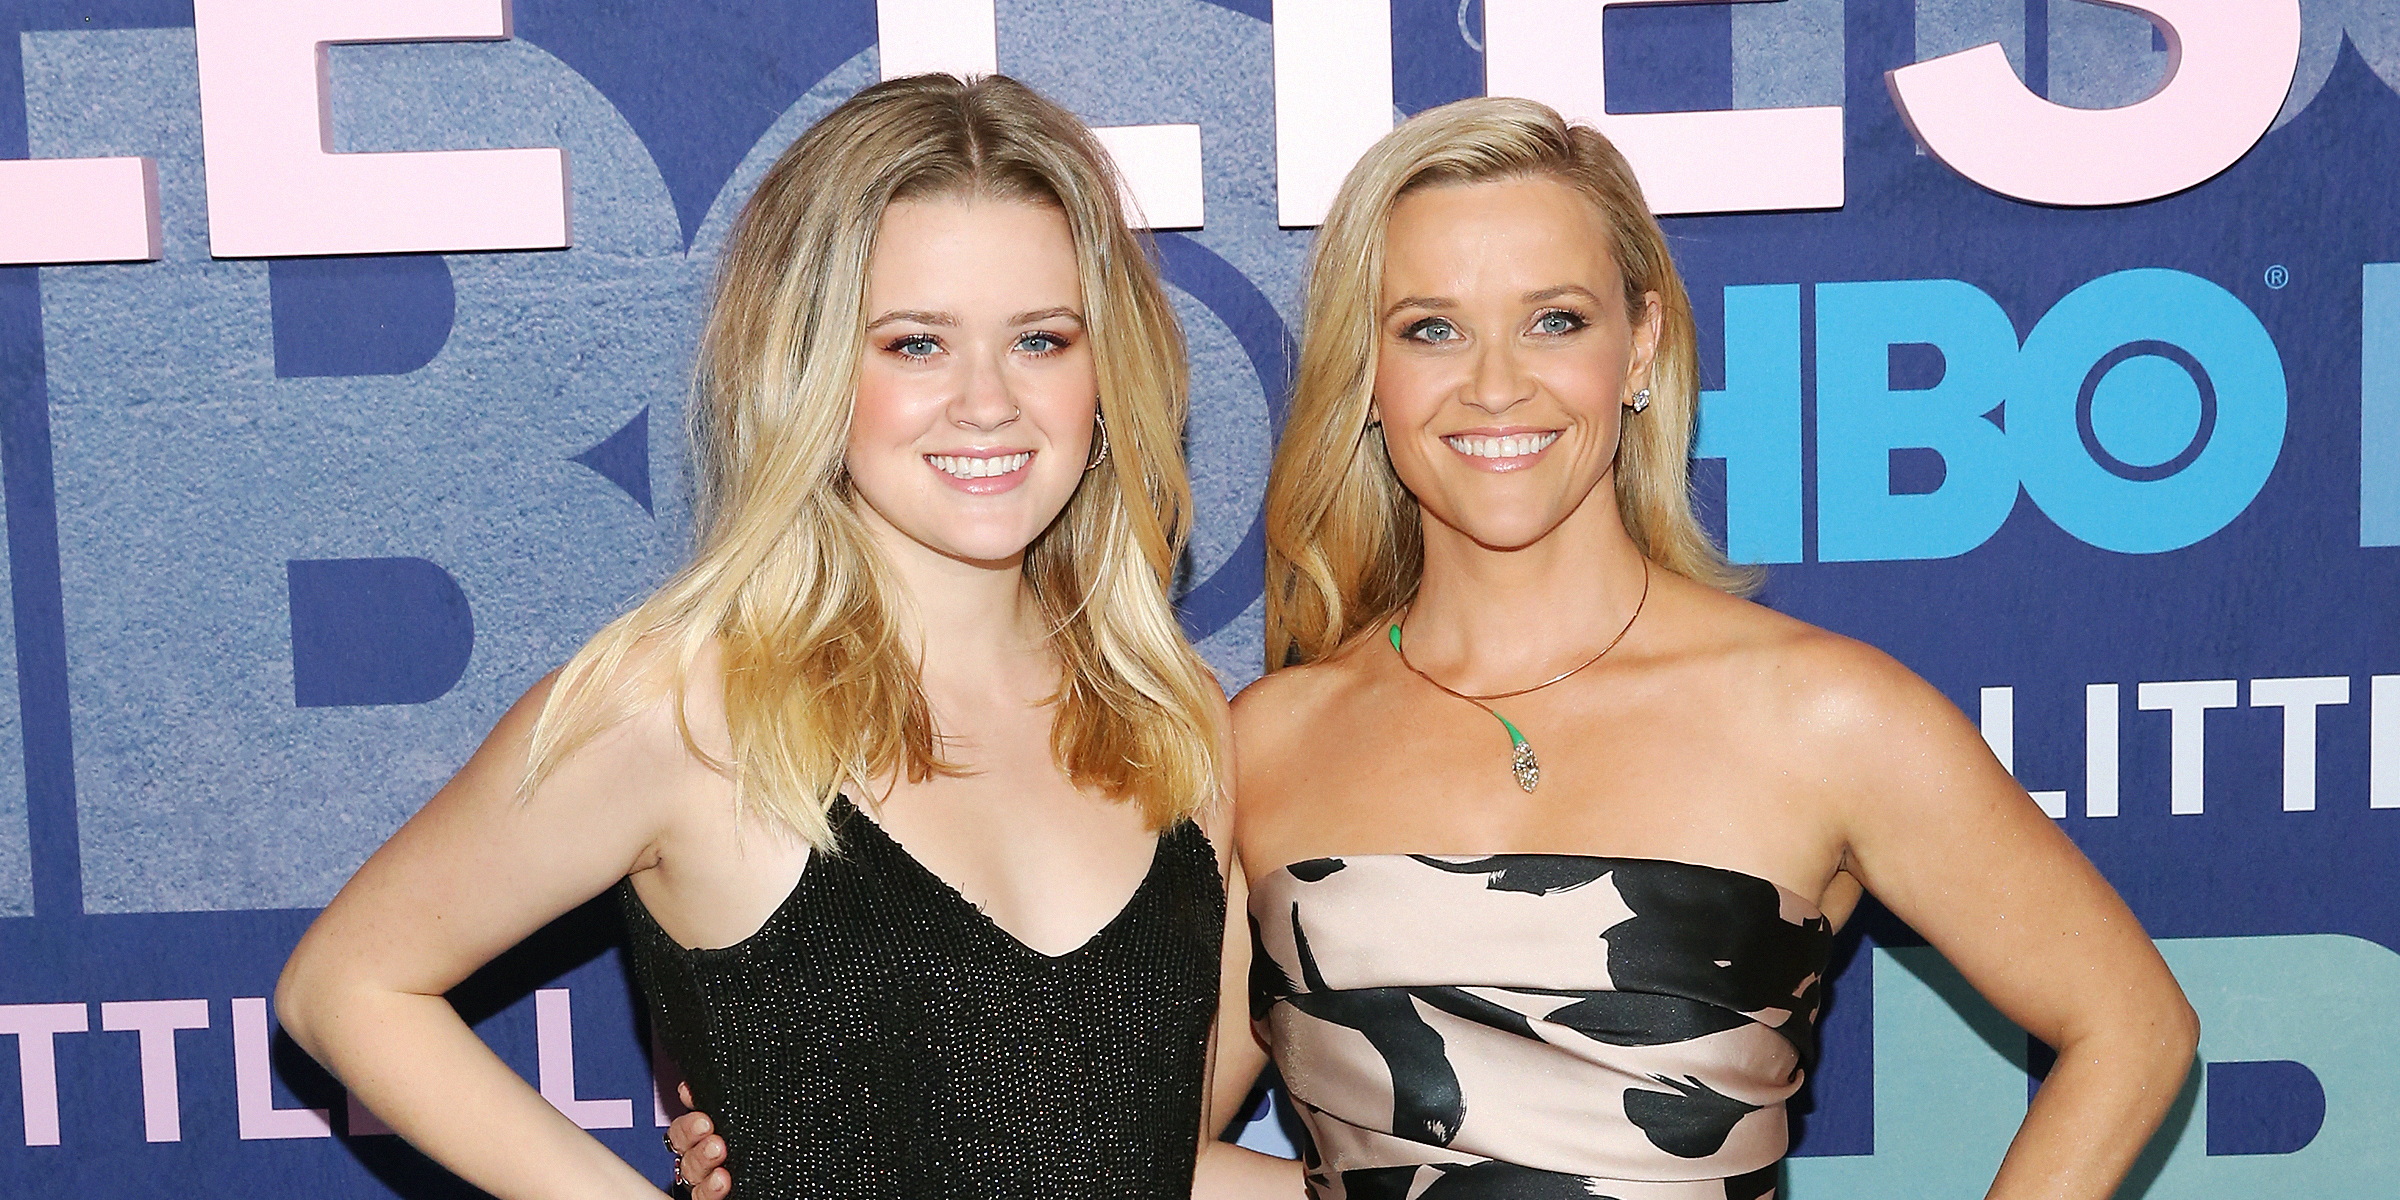 Ava Elizabeth Phillippe und Reese Witherspoon | Quelle: instagram.com/reesewitherspoon/